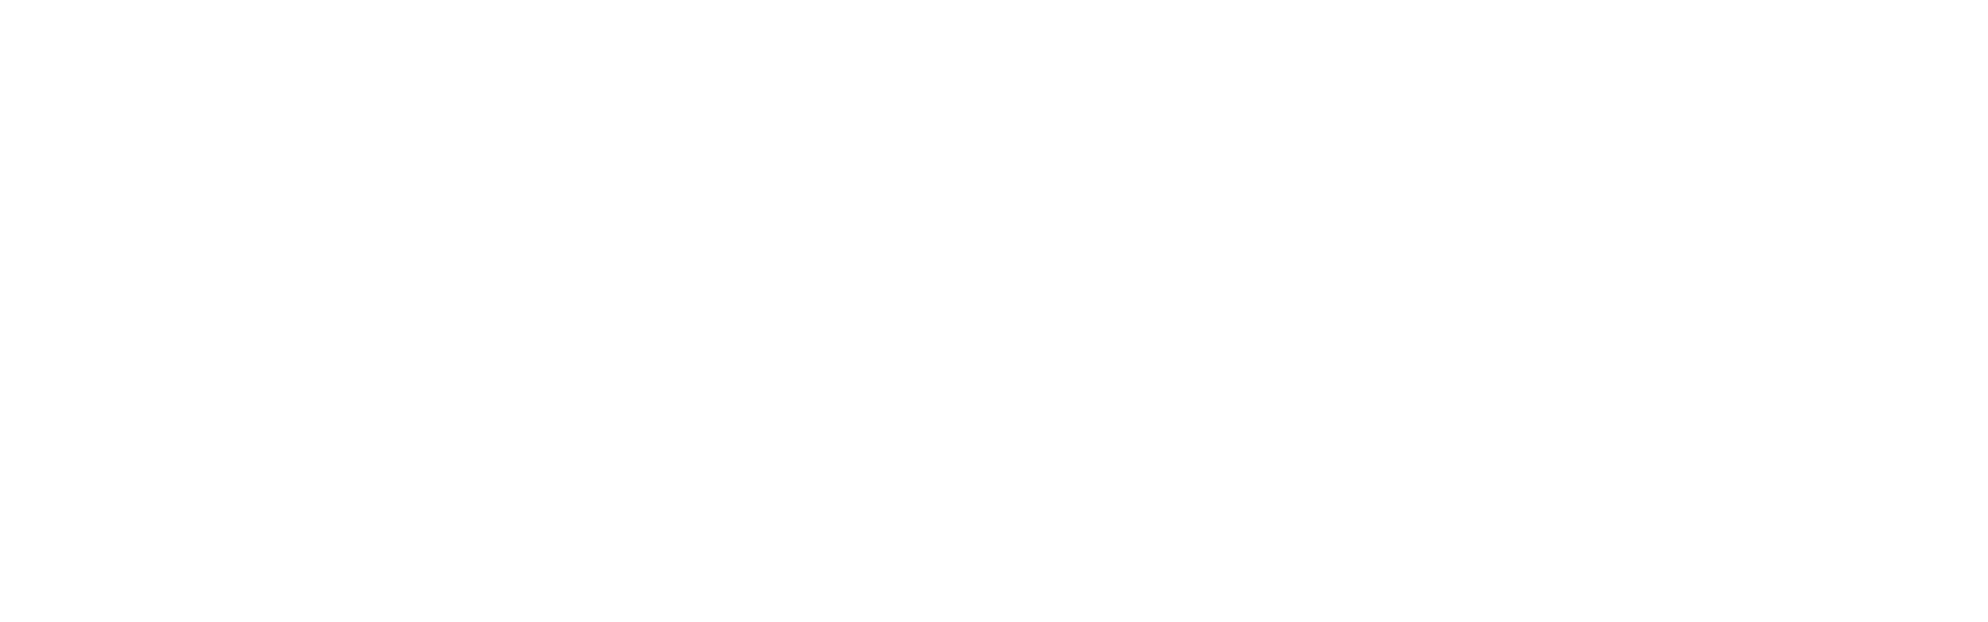 OpenFF Toolkit 0.16.0+0.g3bb4d9f.dirty documentation logo